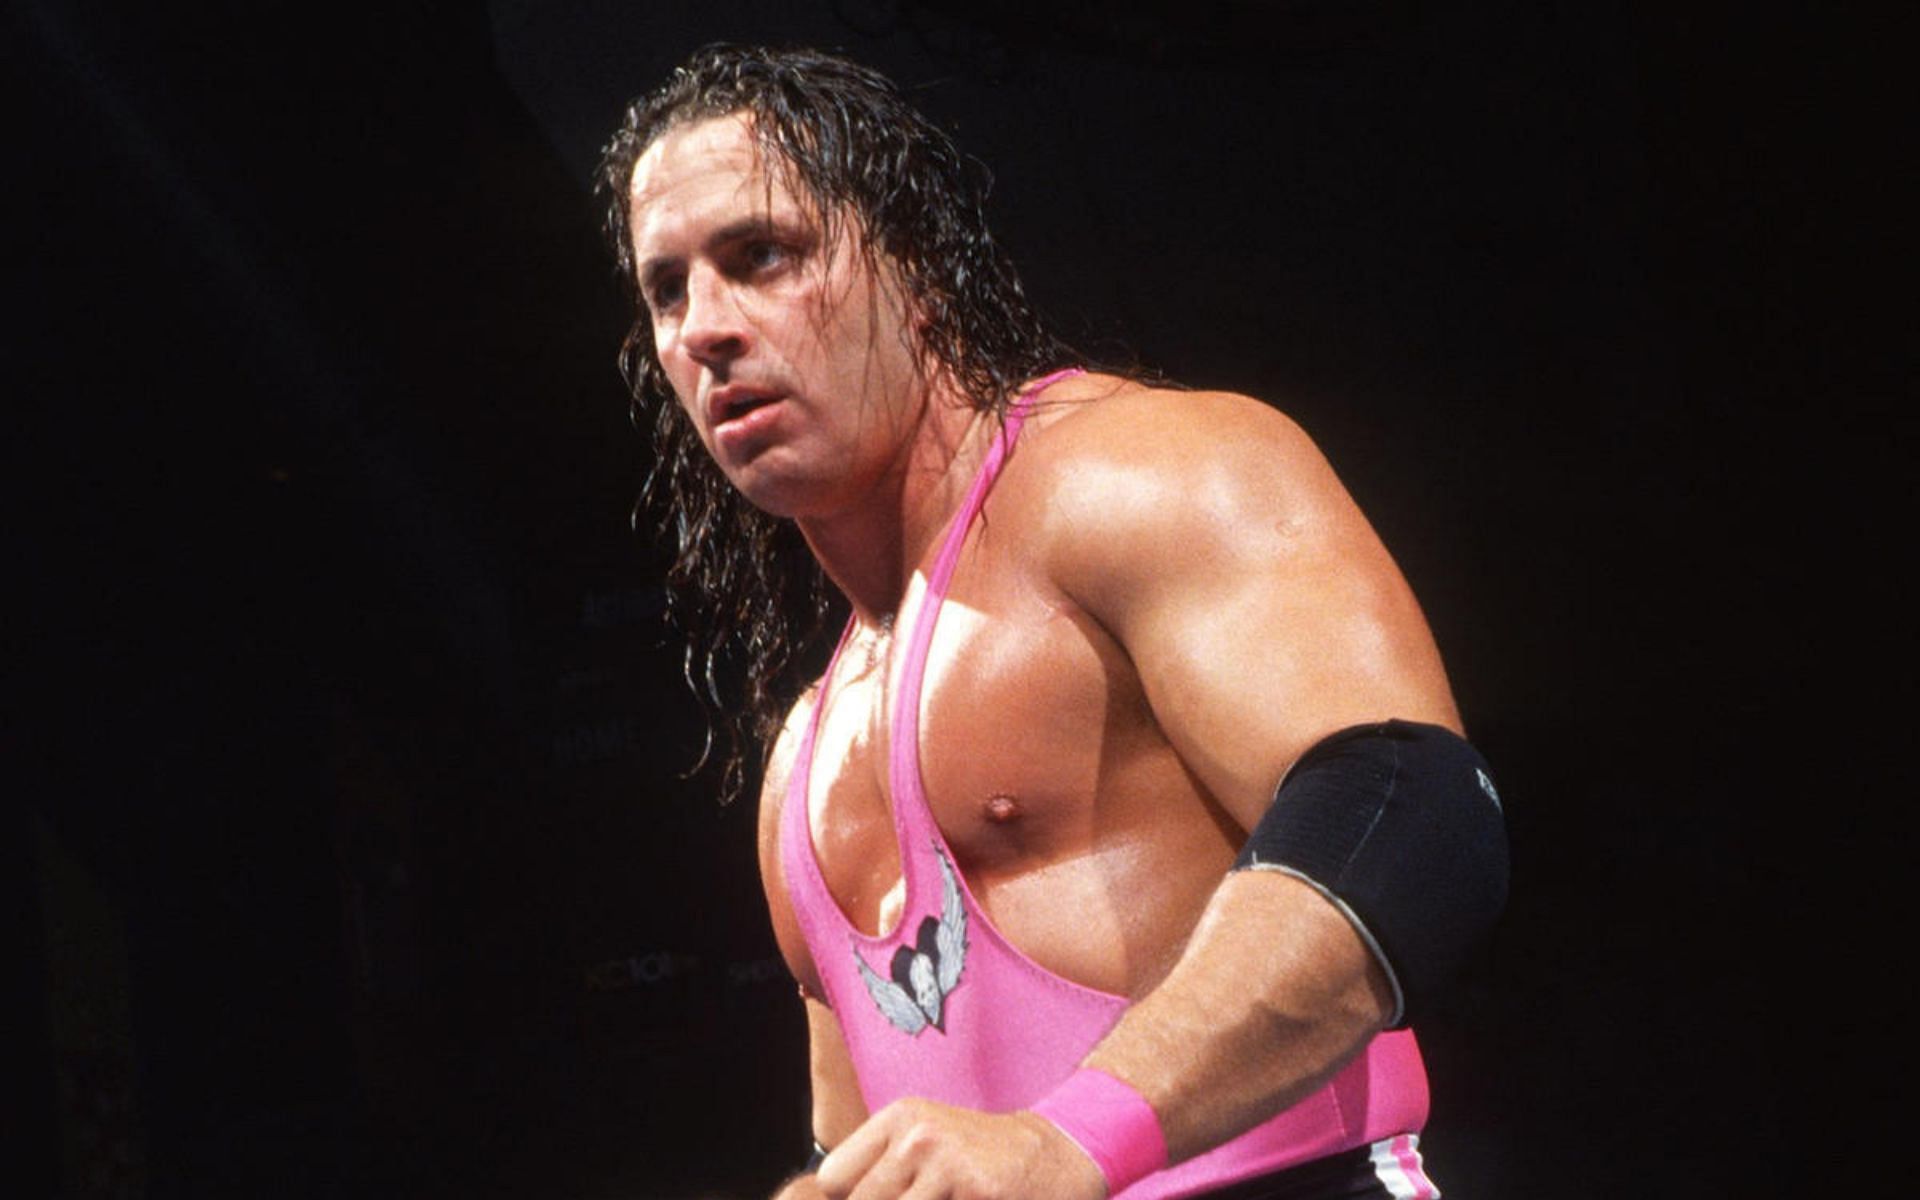 Bret Hart is a former WWE Champion!